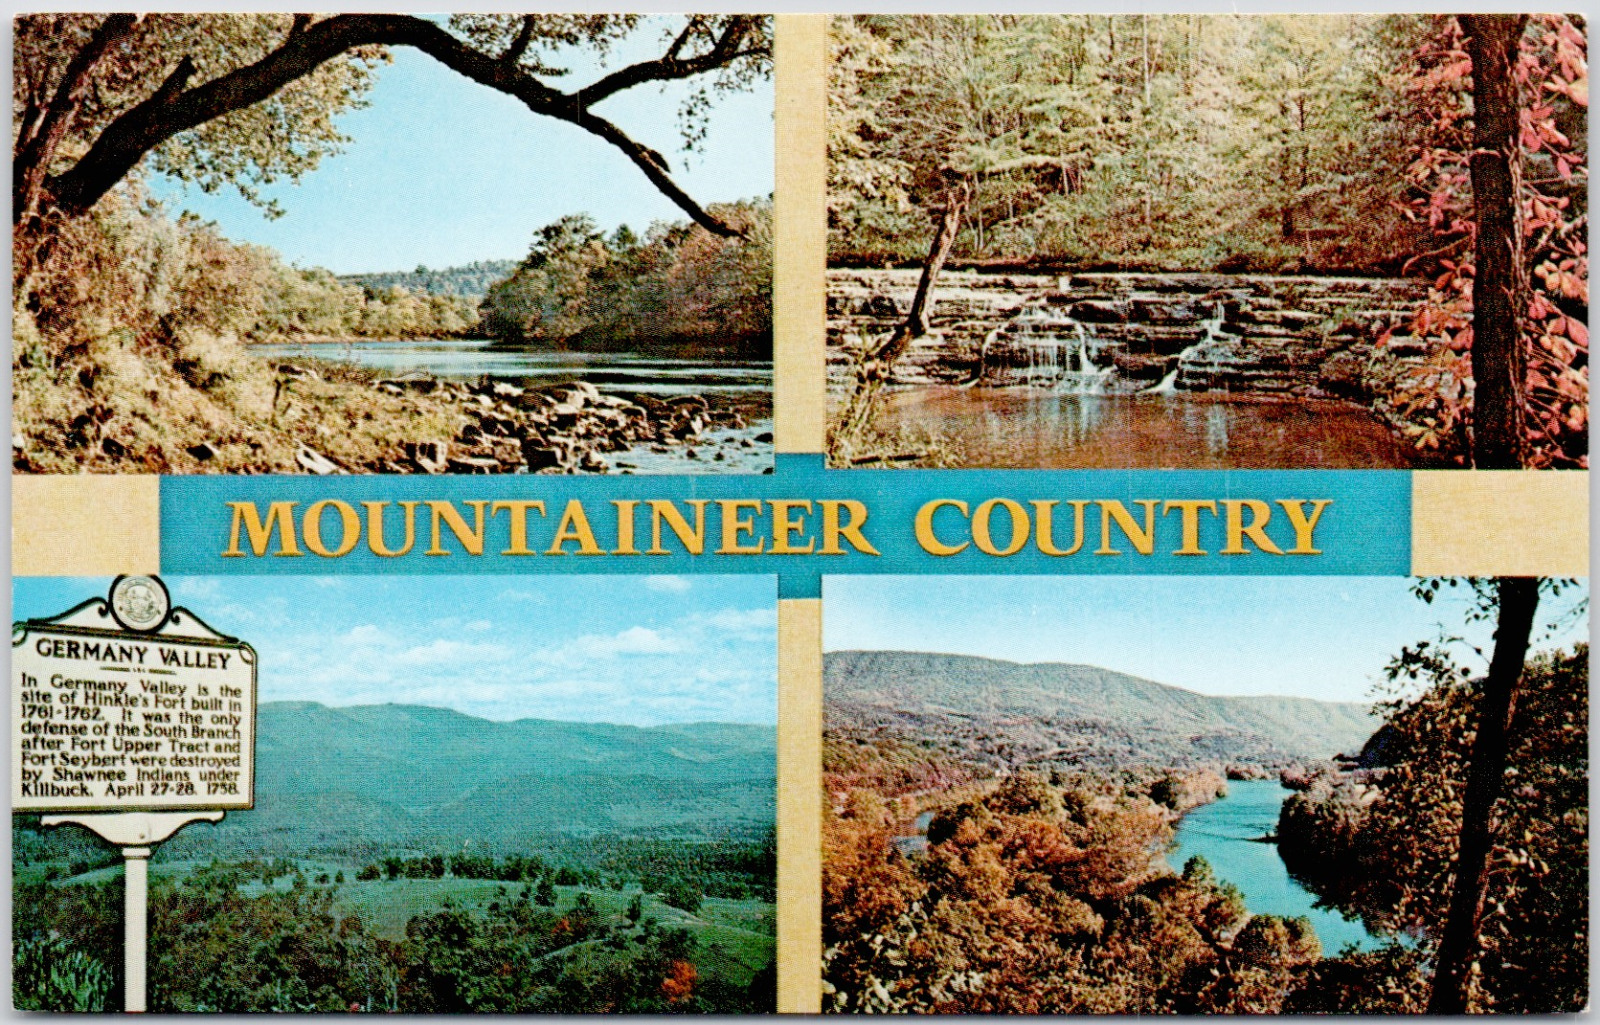 Mountaineer Country West Virginia Greenbriar Germany Valley USA Vintage Postcard